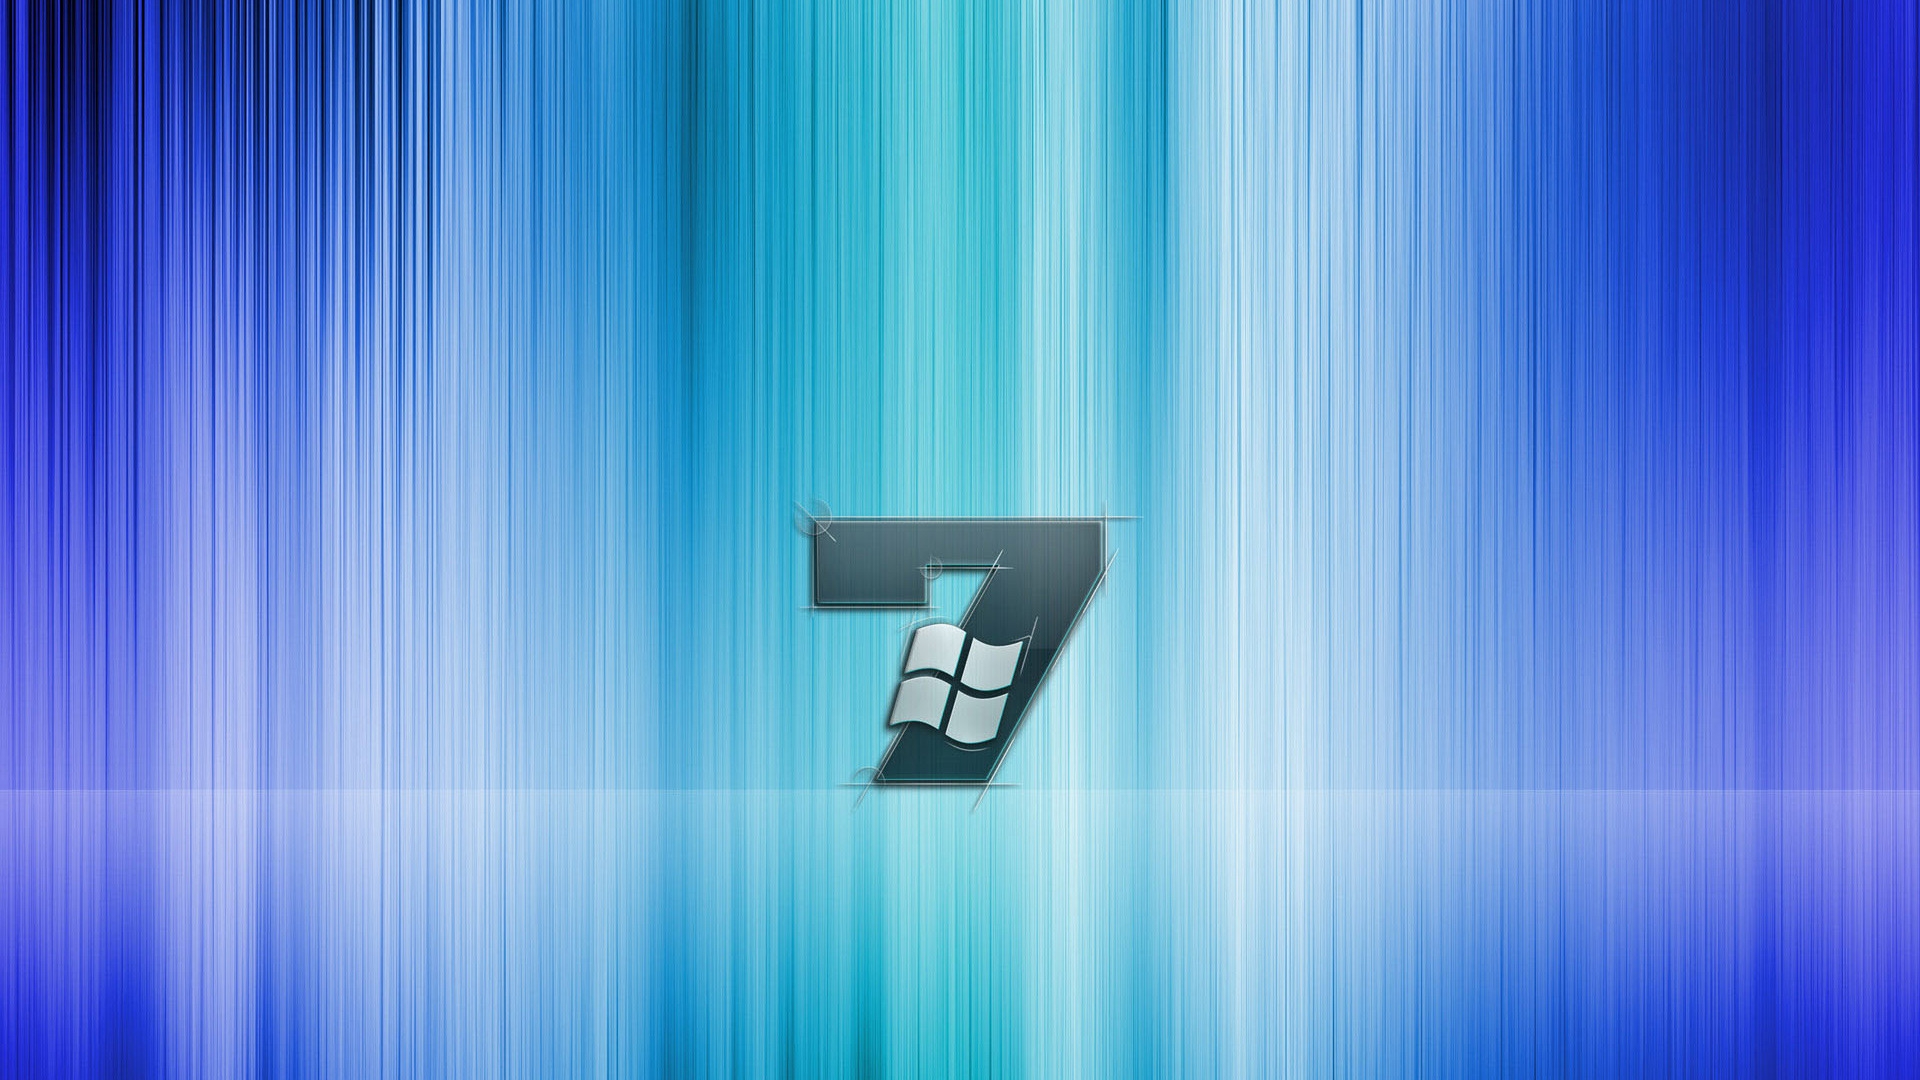 Stylized Windows Seven for 1920 x 1080 HDTV 1080p resolution